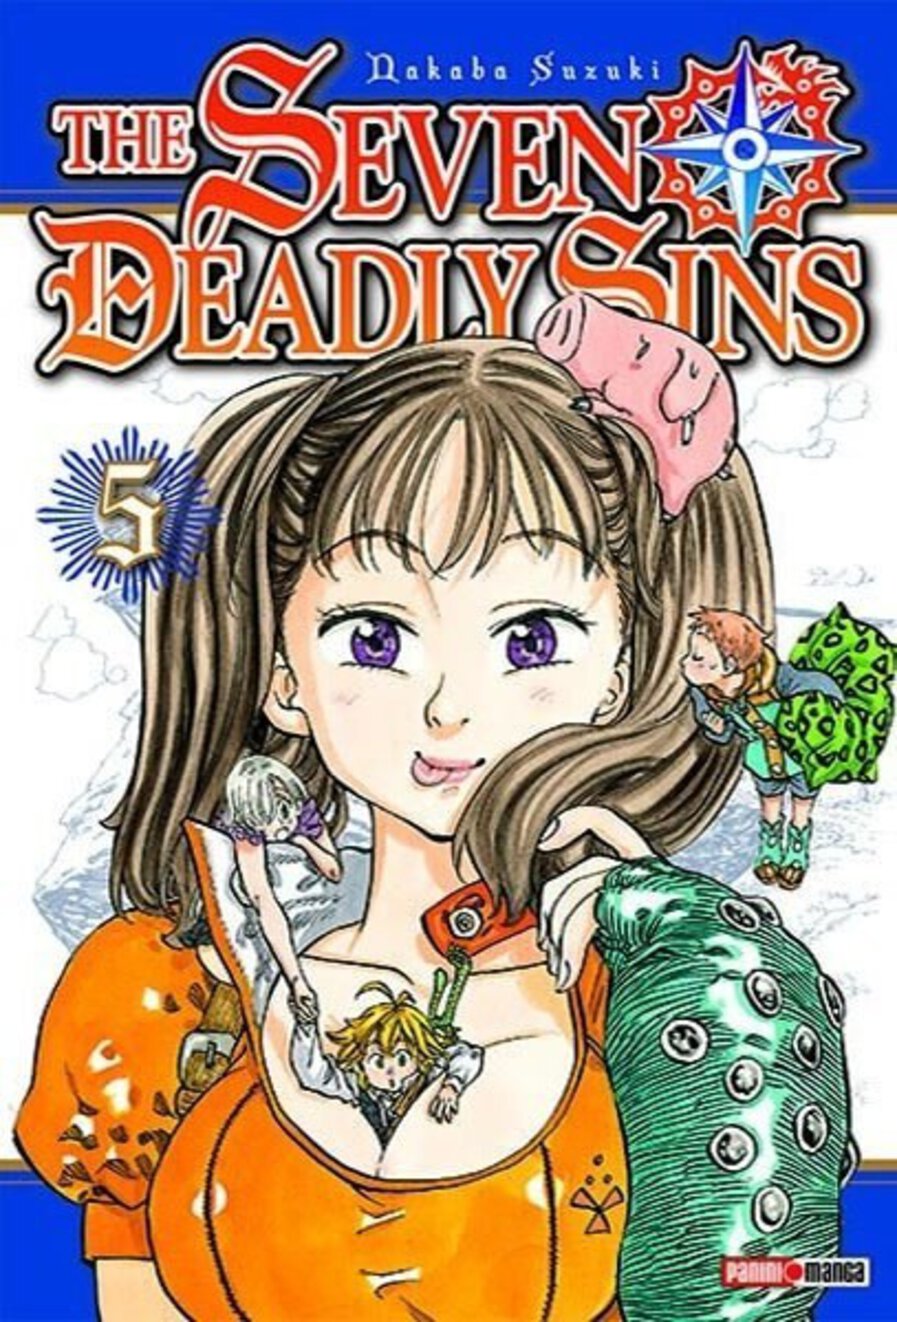 THE SEVEN DEADLY SINS N.5